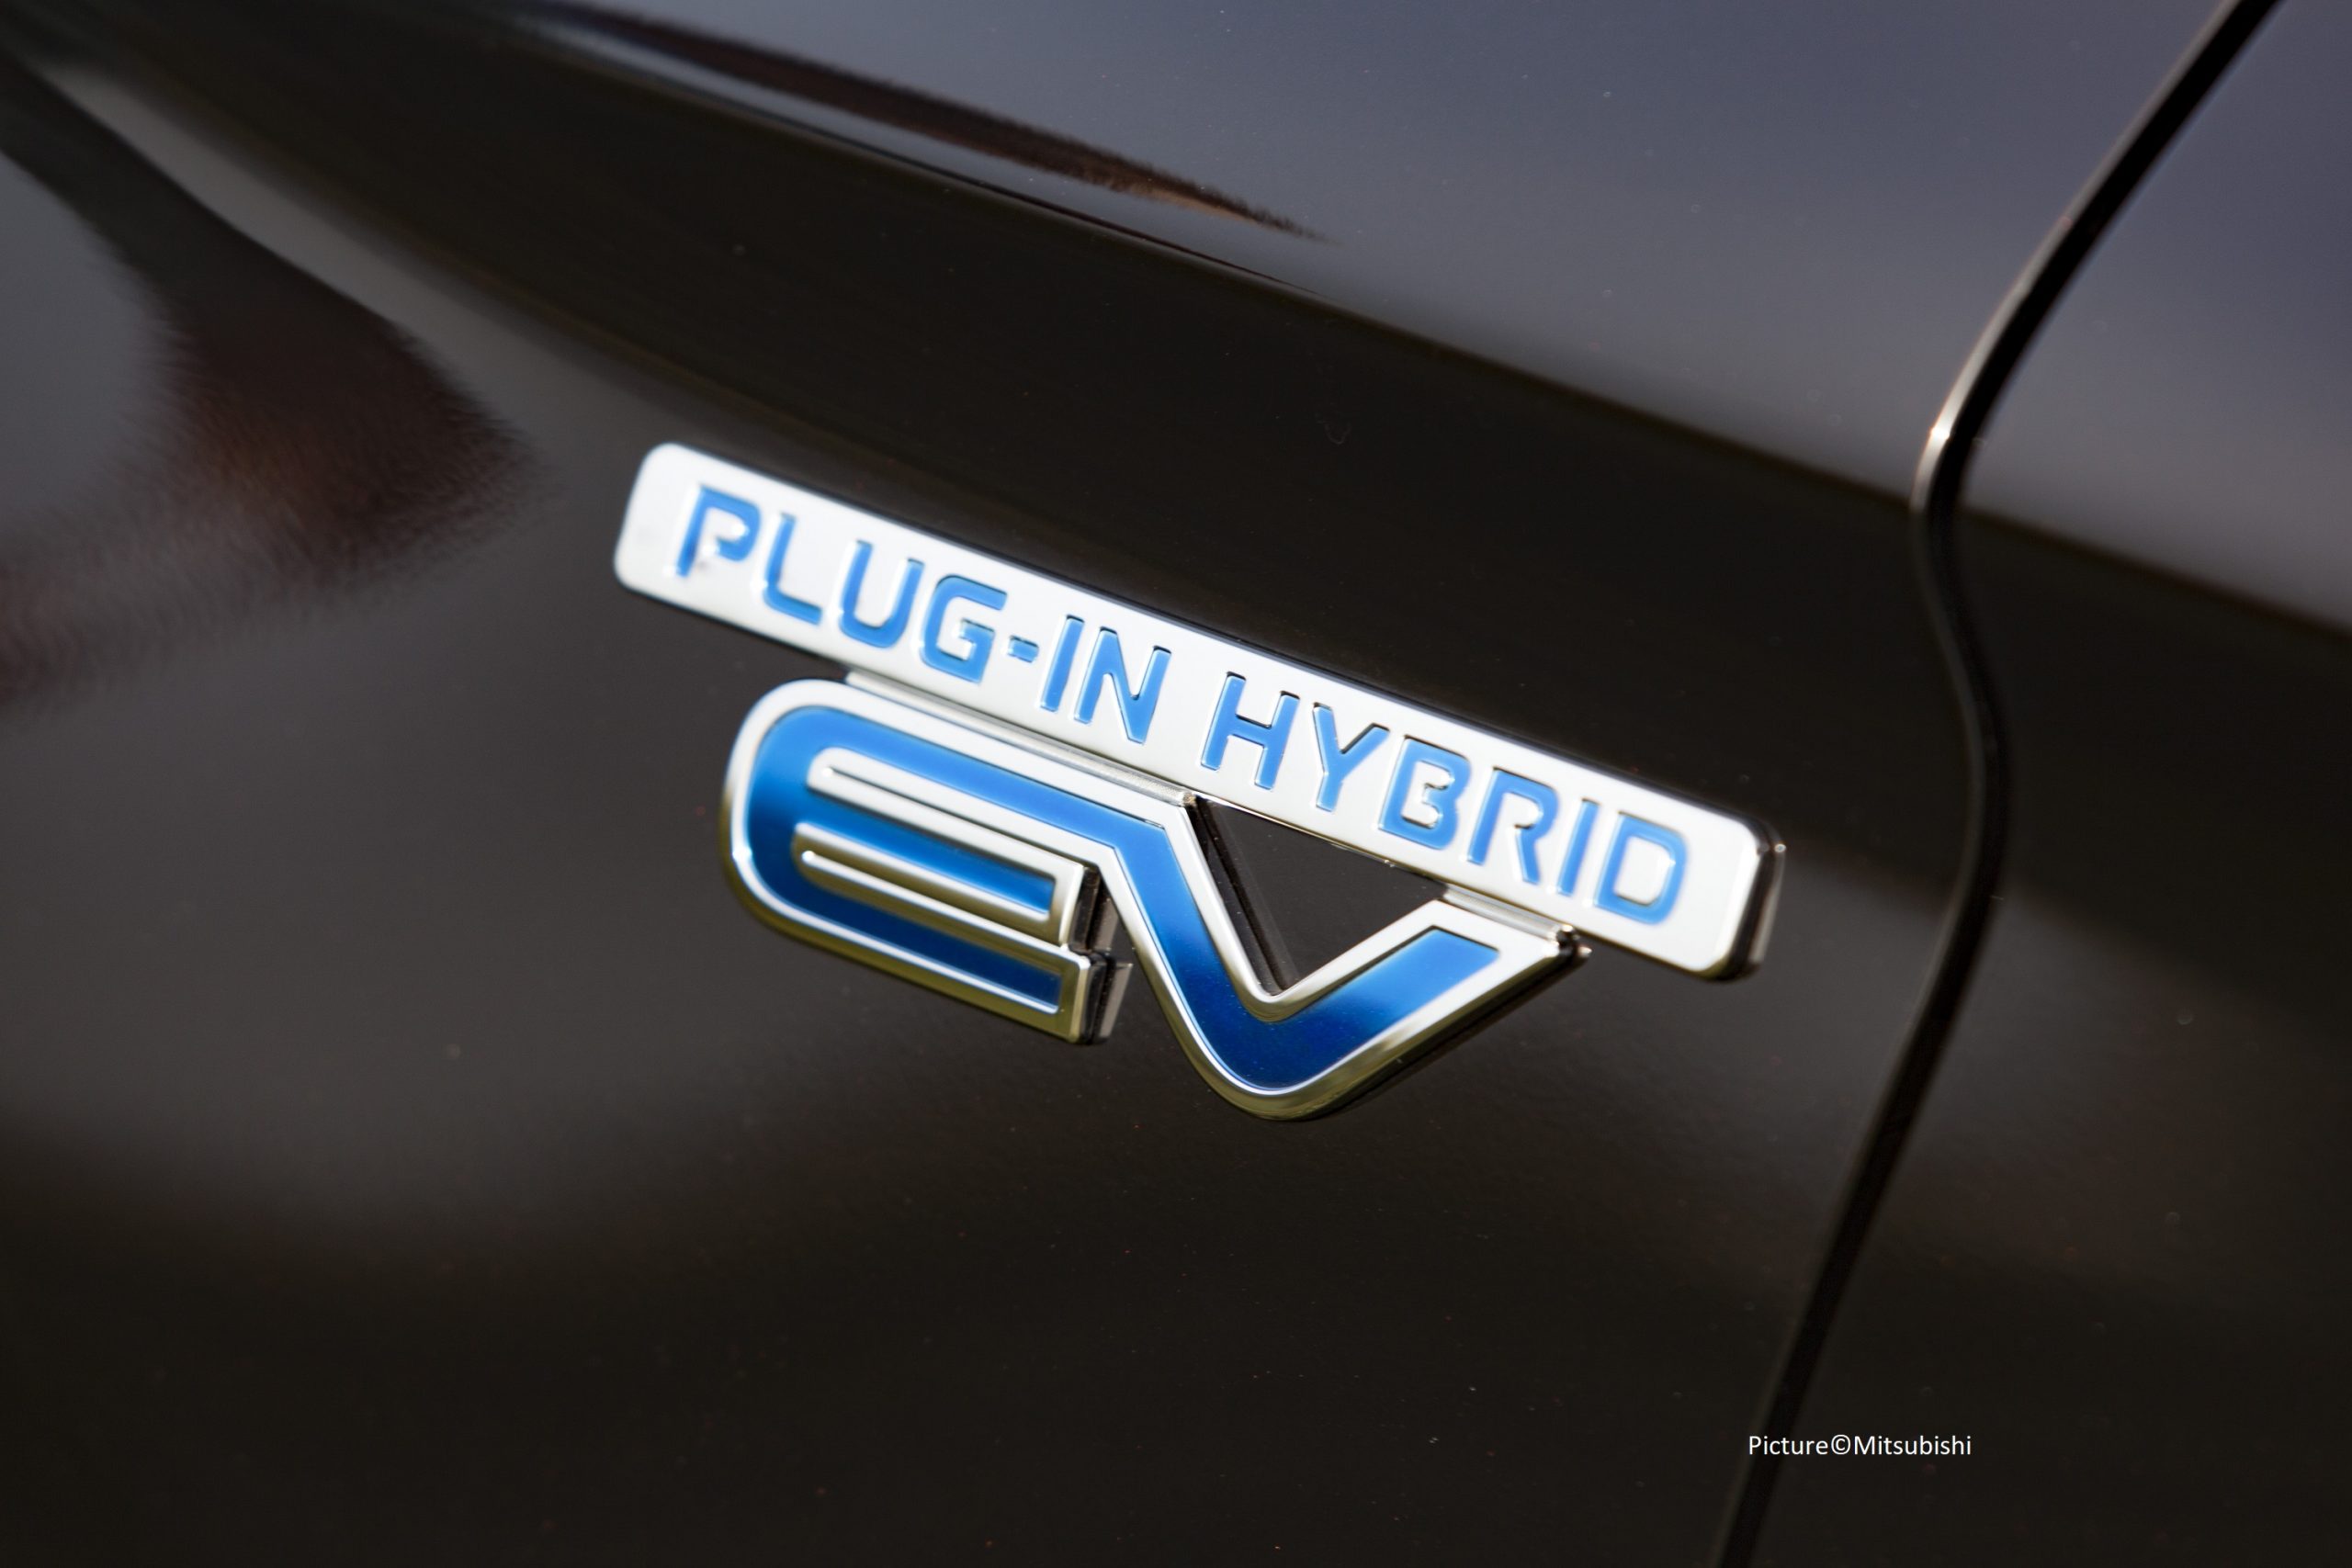 From a car tax perspective, is it worthwhile buying a plug-in hybrid?